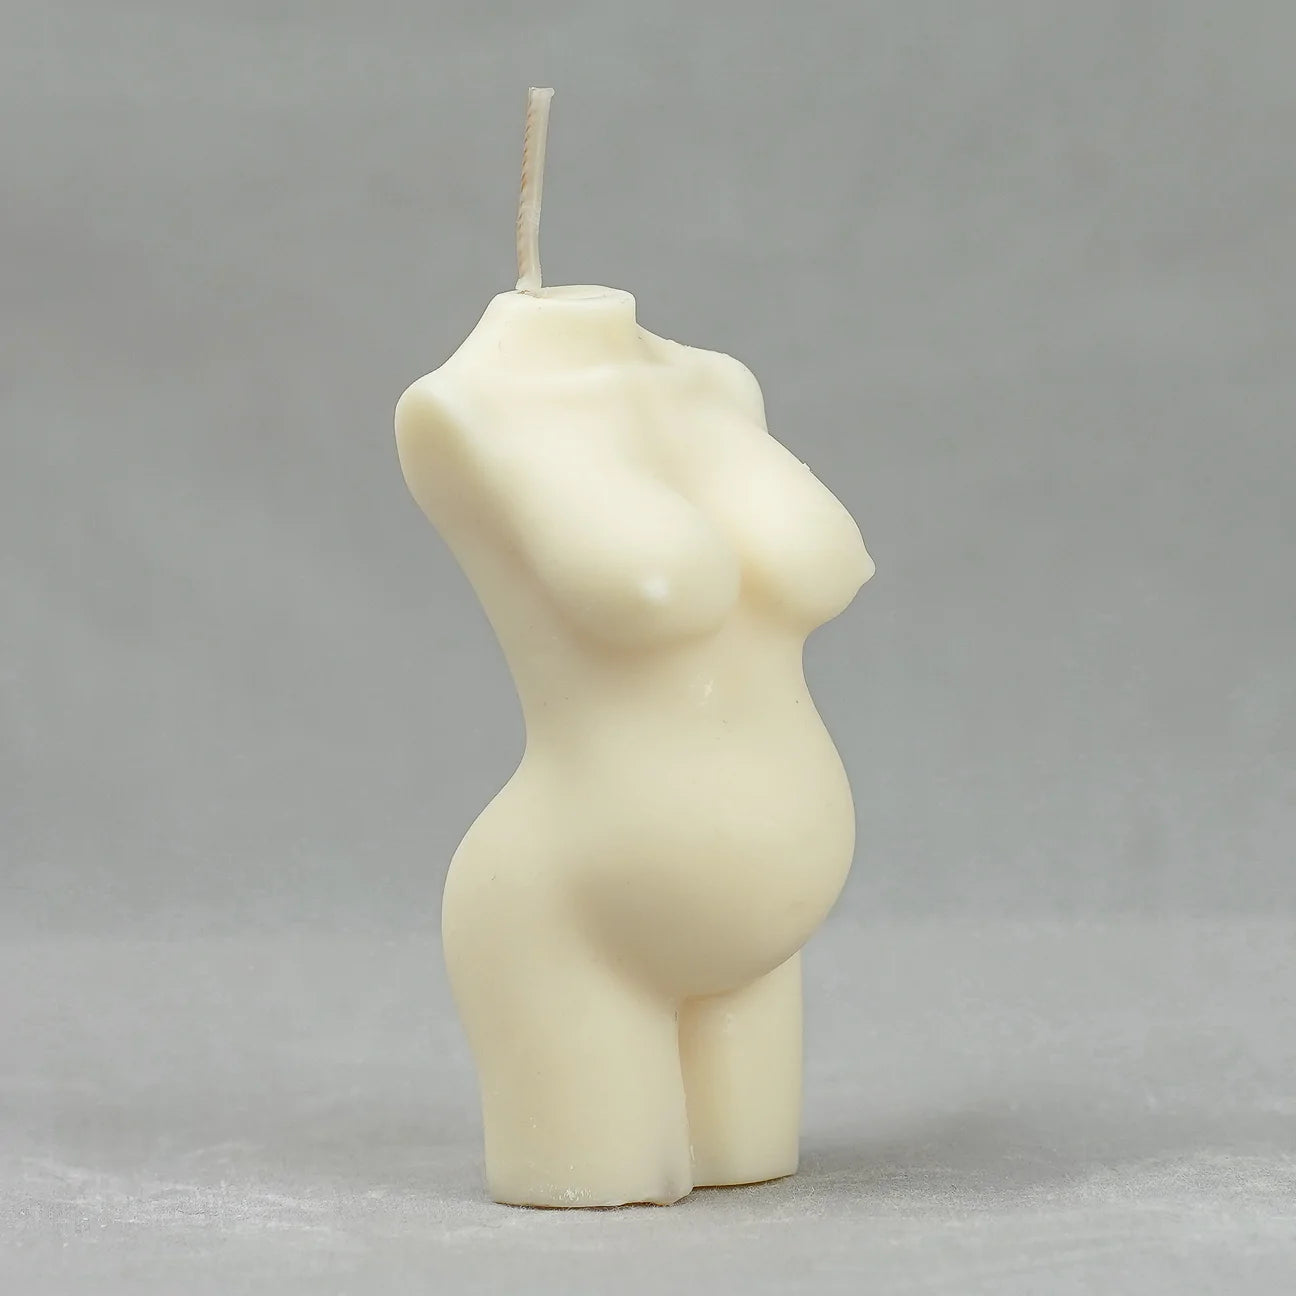 Pregnancy Candle